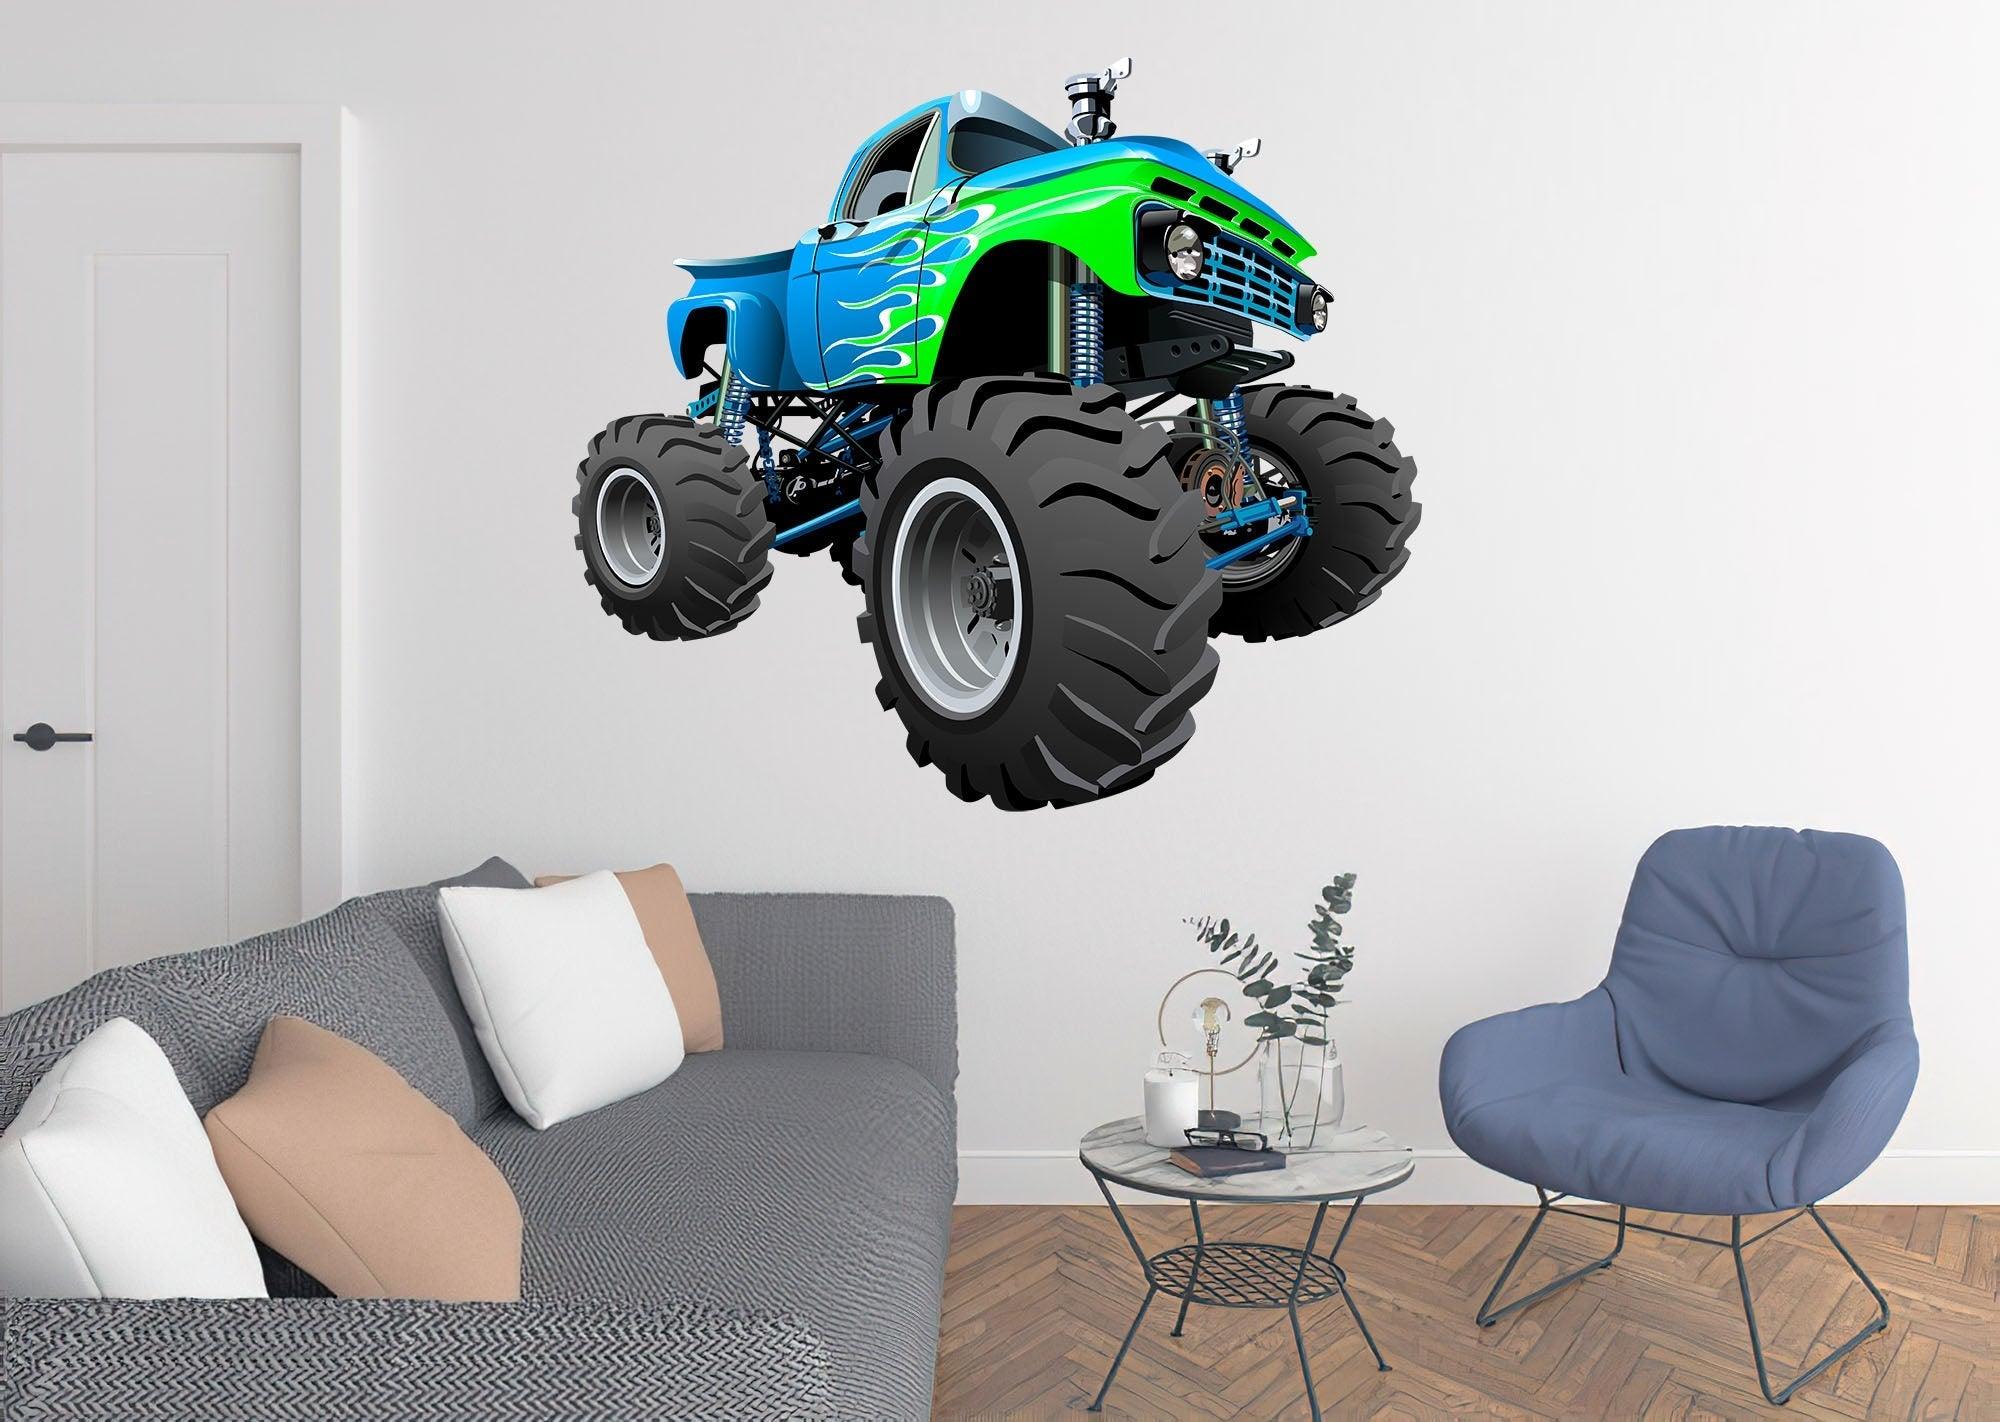 3D Green & Blue Monster Truck on Wall, Wall Decal Sticker, Removable 106